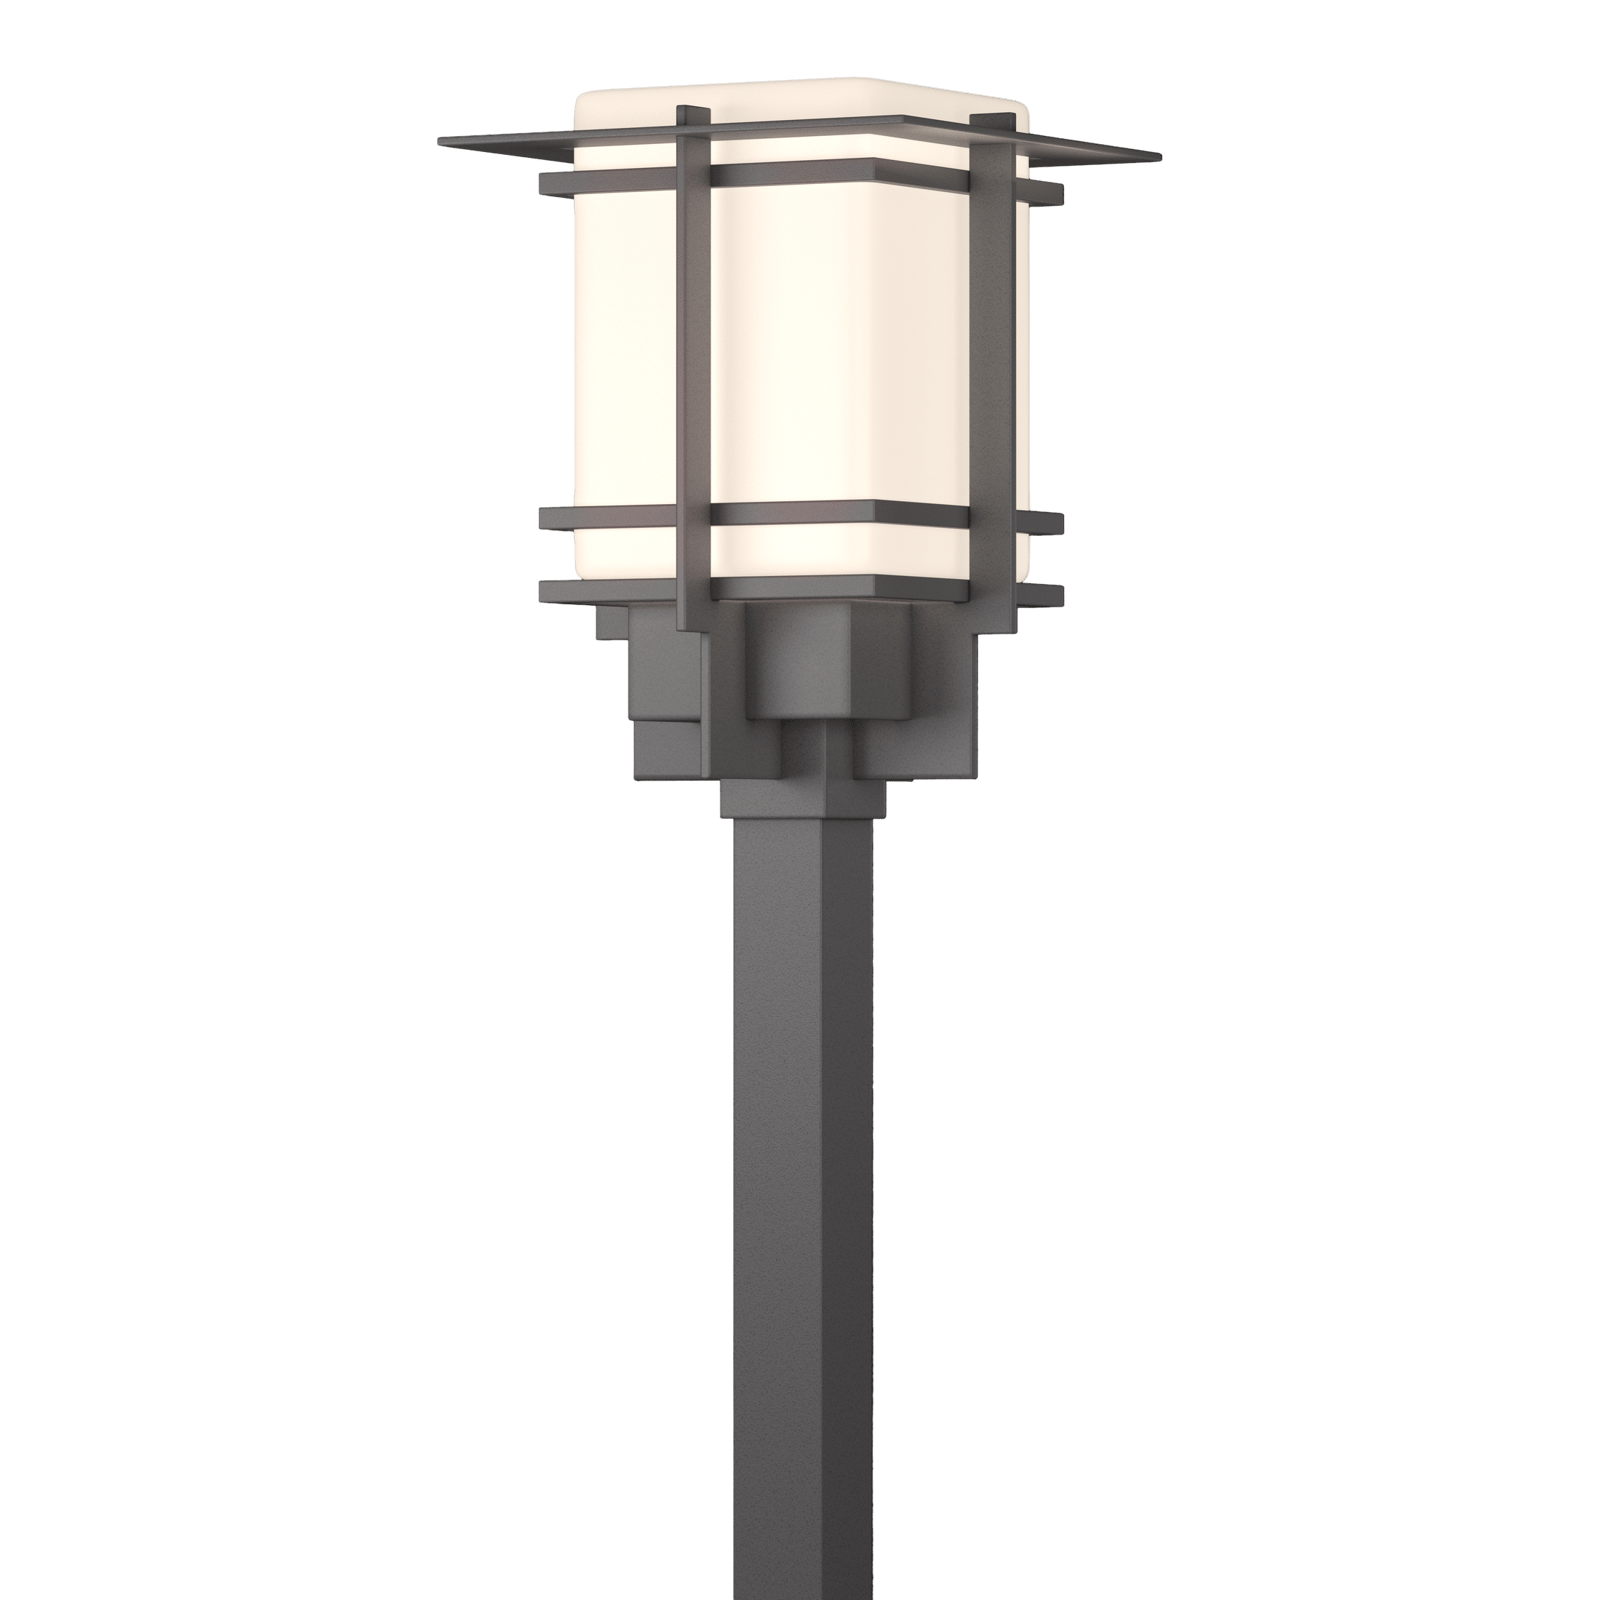 Hubbardton Forge Tourou Large Outdoor Post Light Outdoor l Post/Pier Mounts Hubbardton Forge Coastal Burnished Steel Opal Glass (GG) 